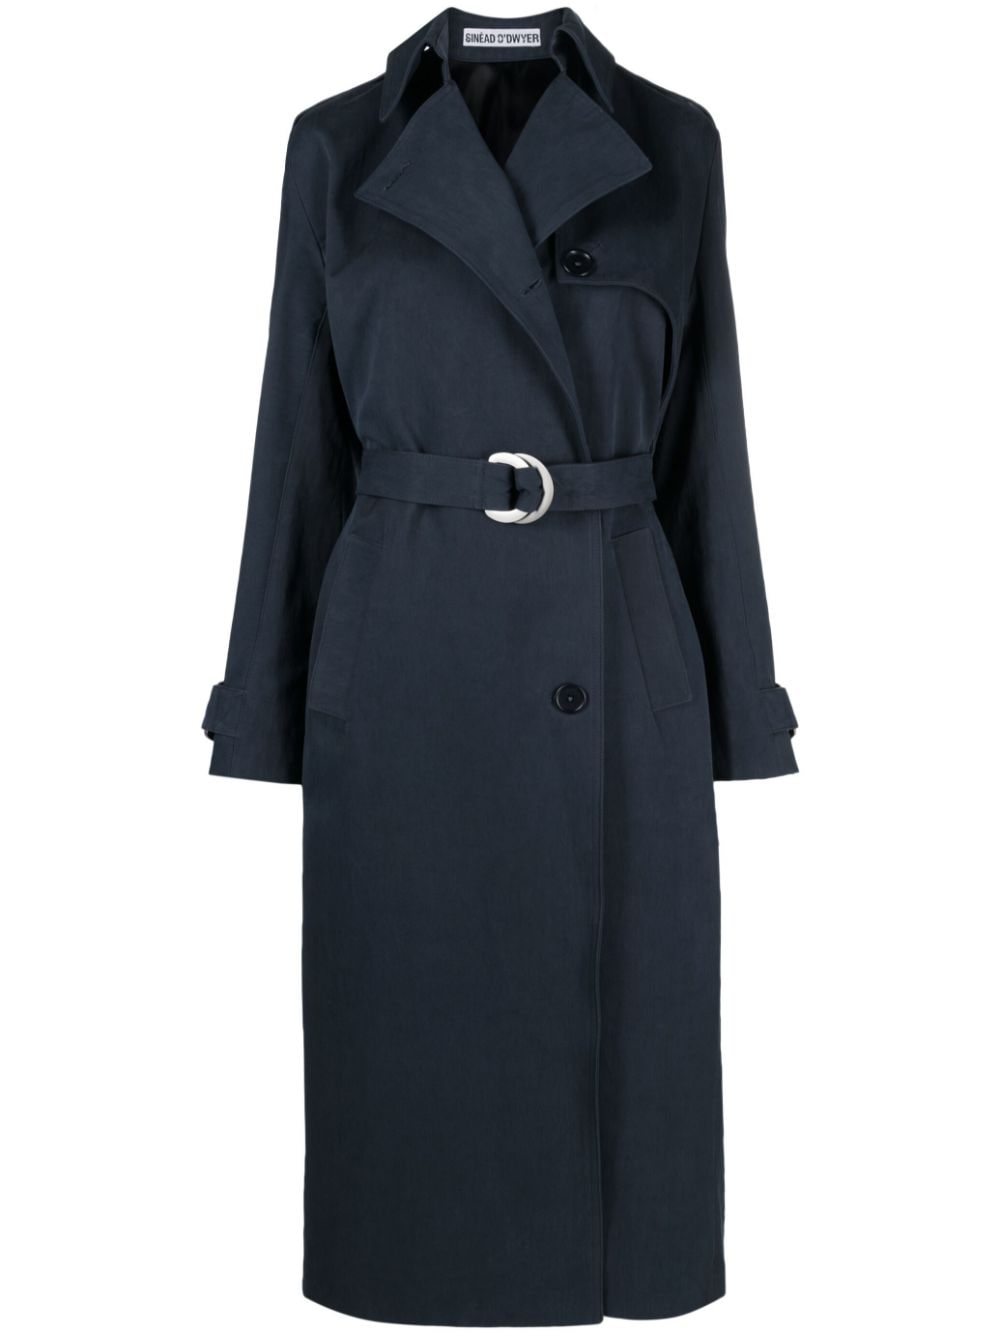 Sinead O'Dwyer belted cotton trench coat - Blu